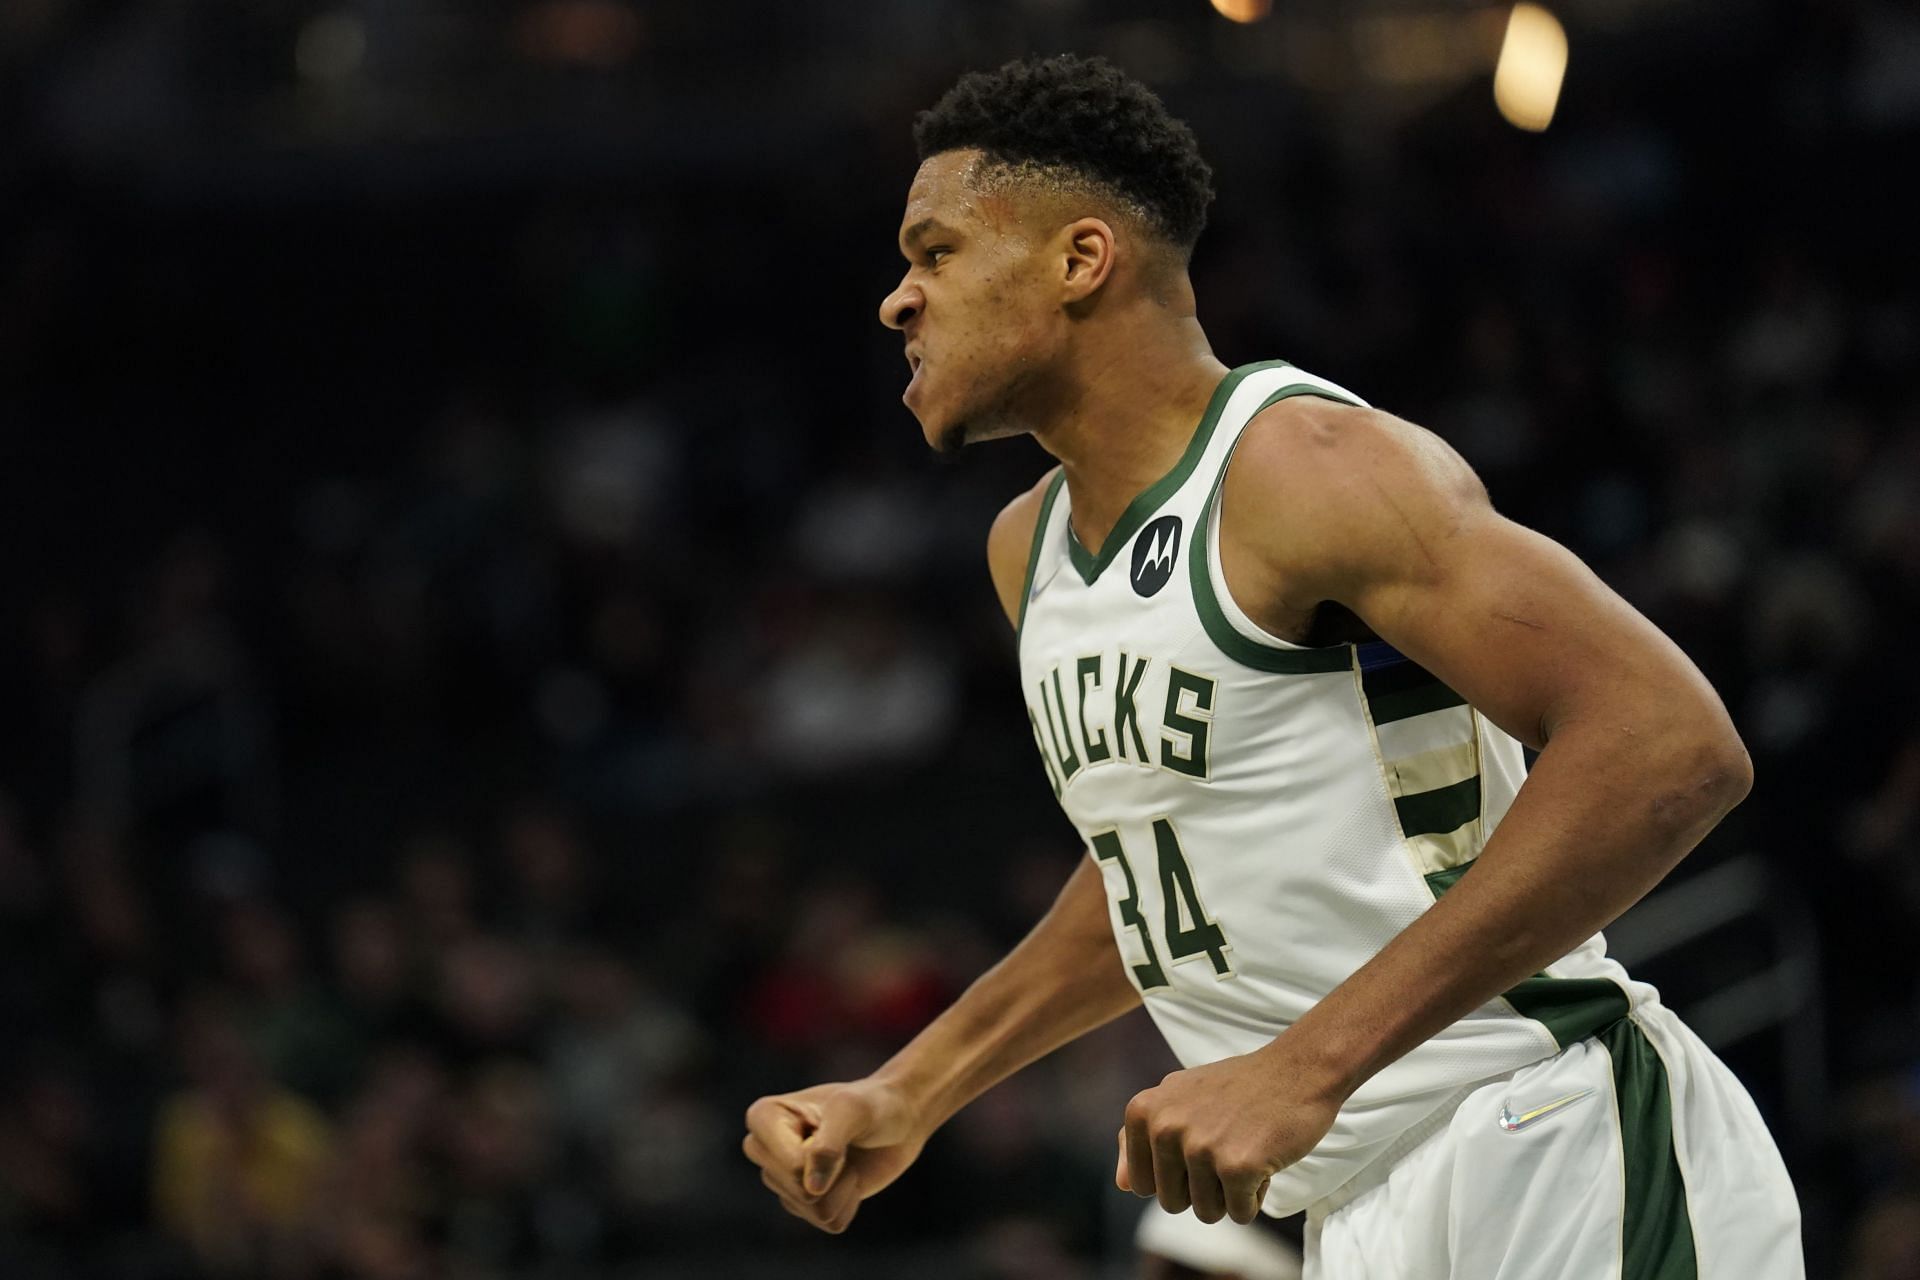 Reigning NBA Champions Milwaukee Bucks will be led by Giannis Antetokounmpo